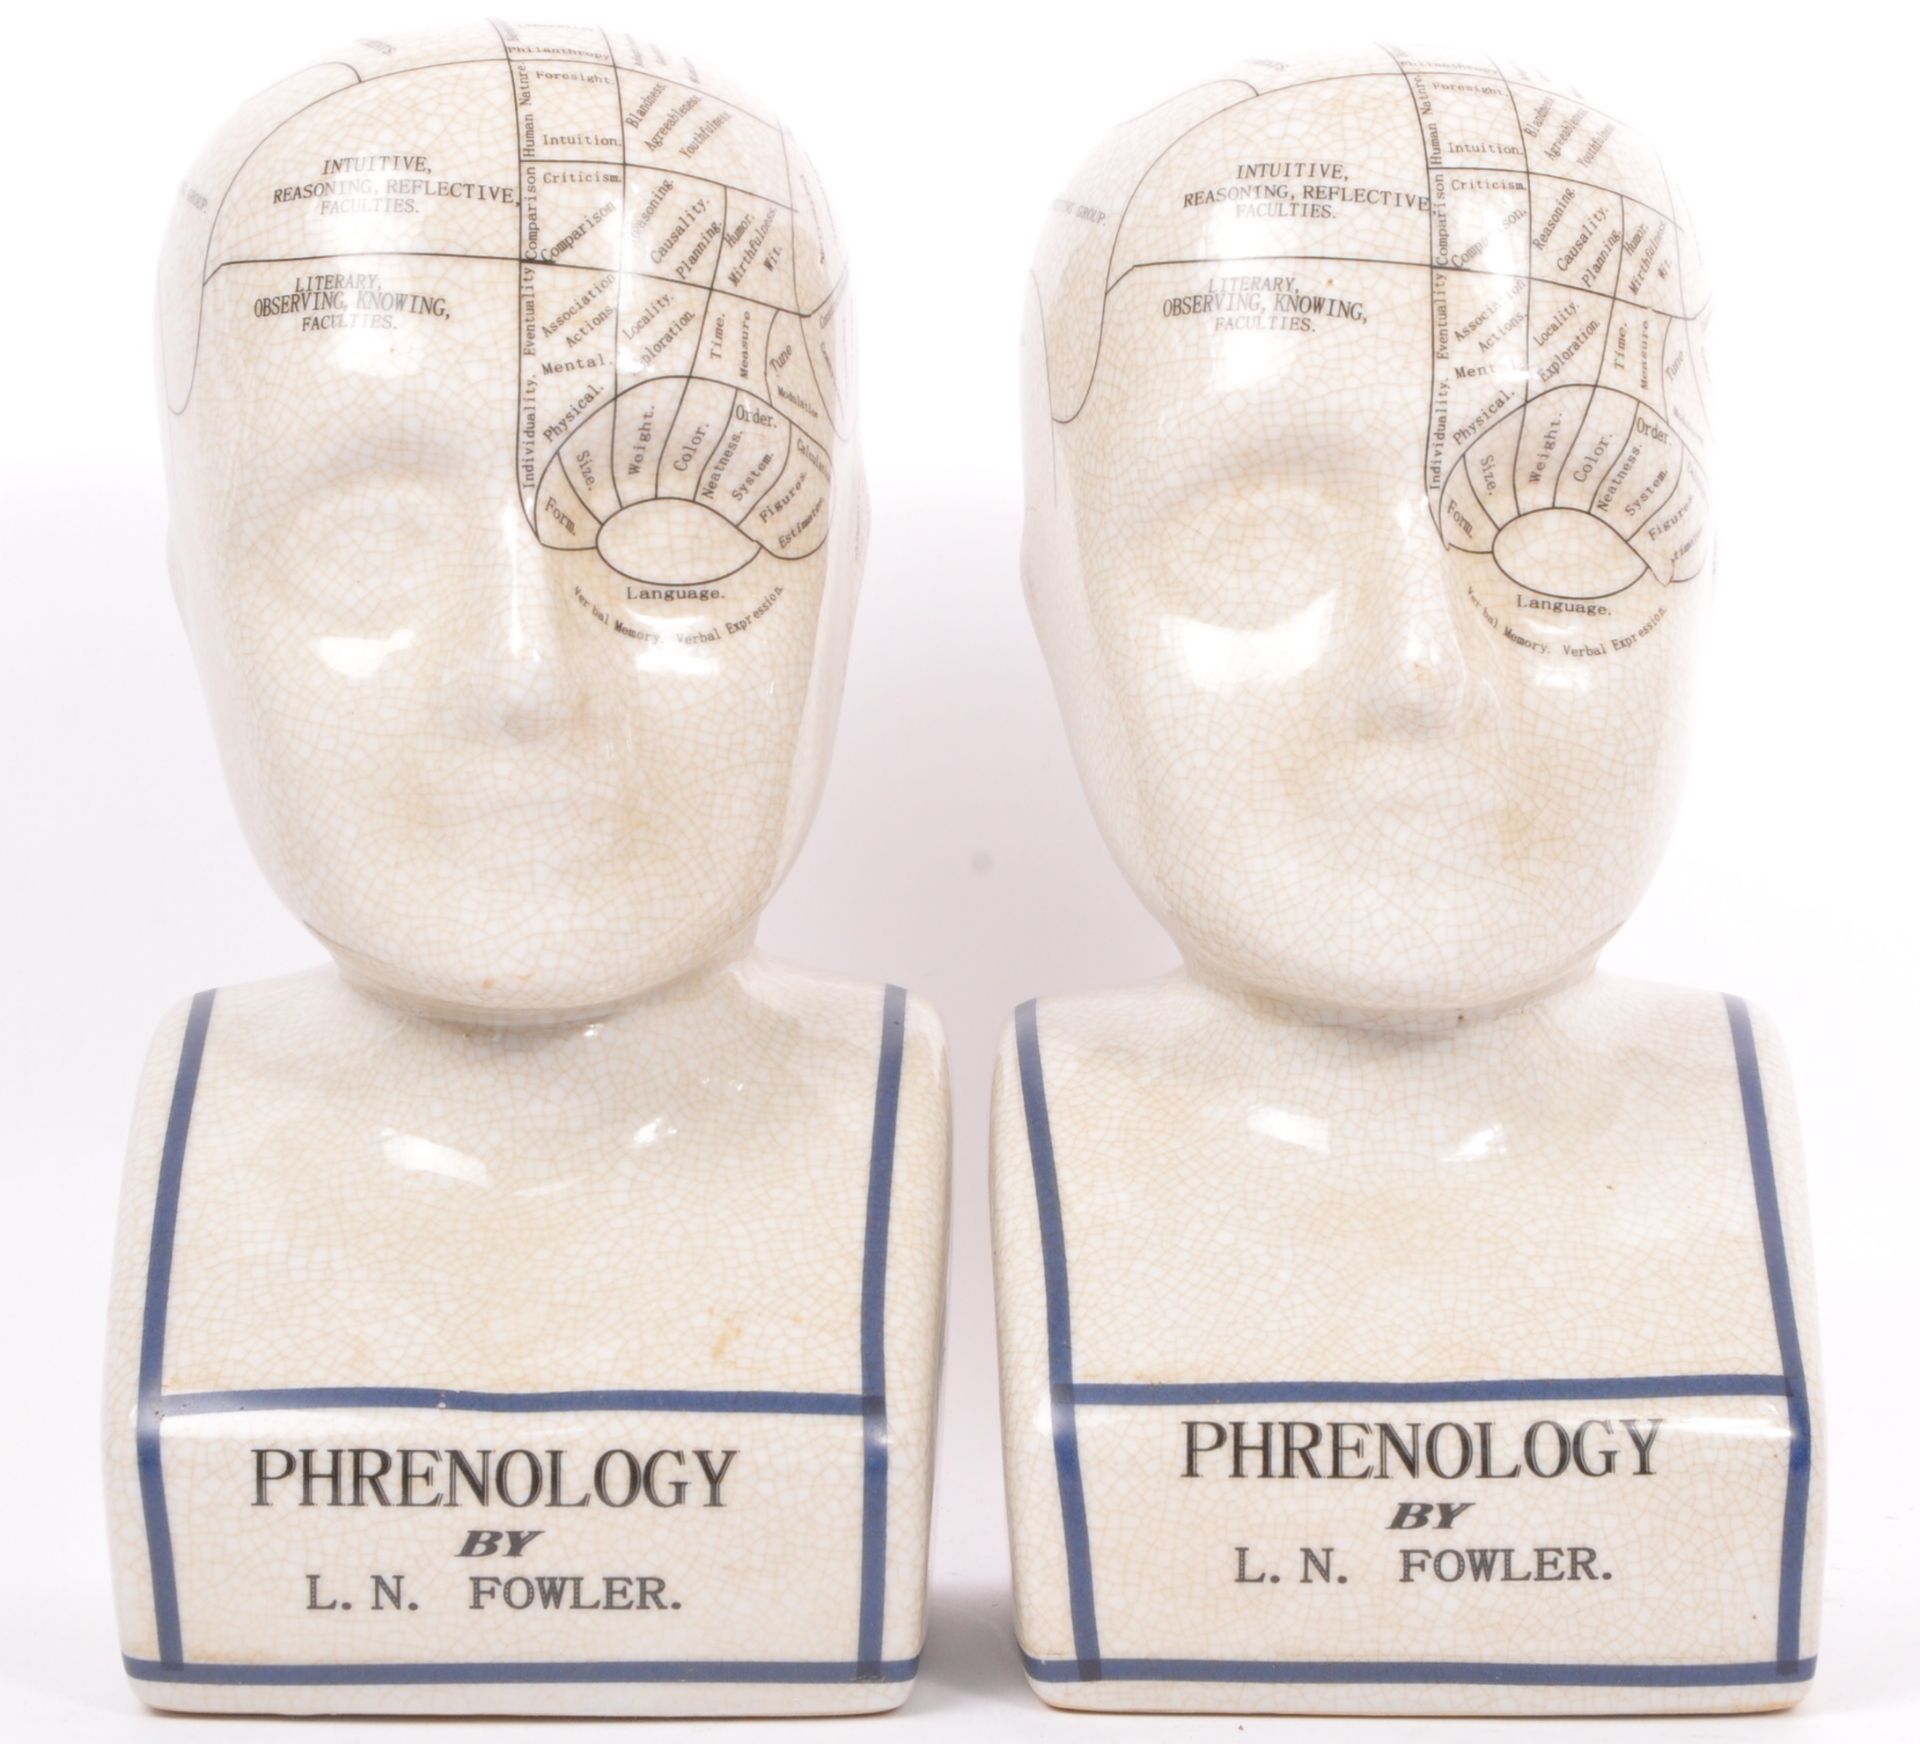 PAIR OF VINTAGE PHRENOLOGY CERAMIC BUSTS AFTER L. N. FOWLER